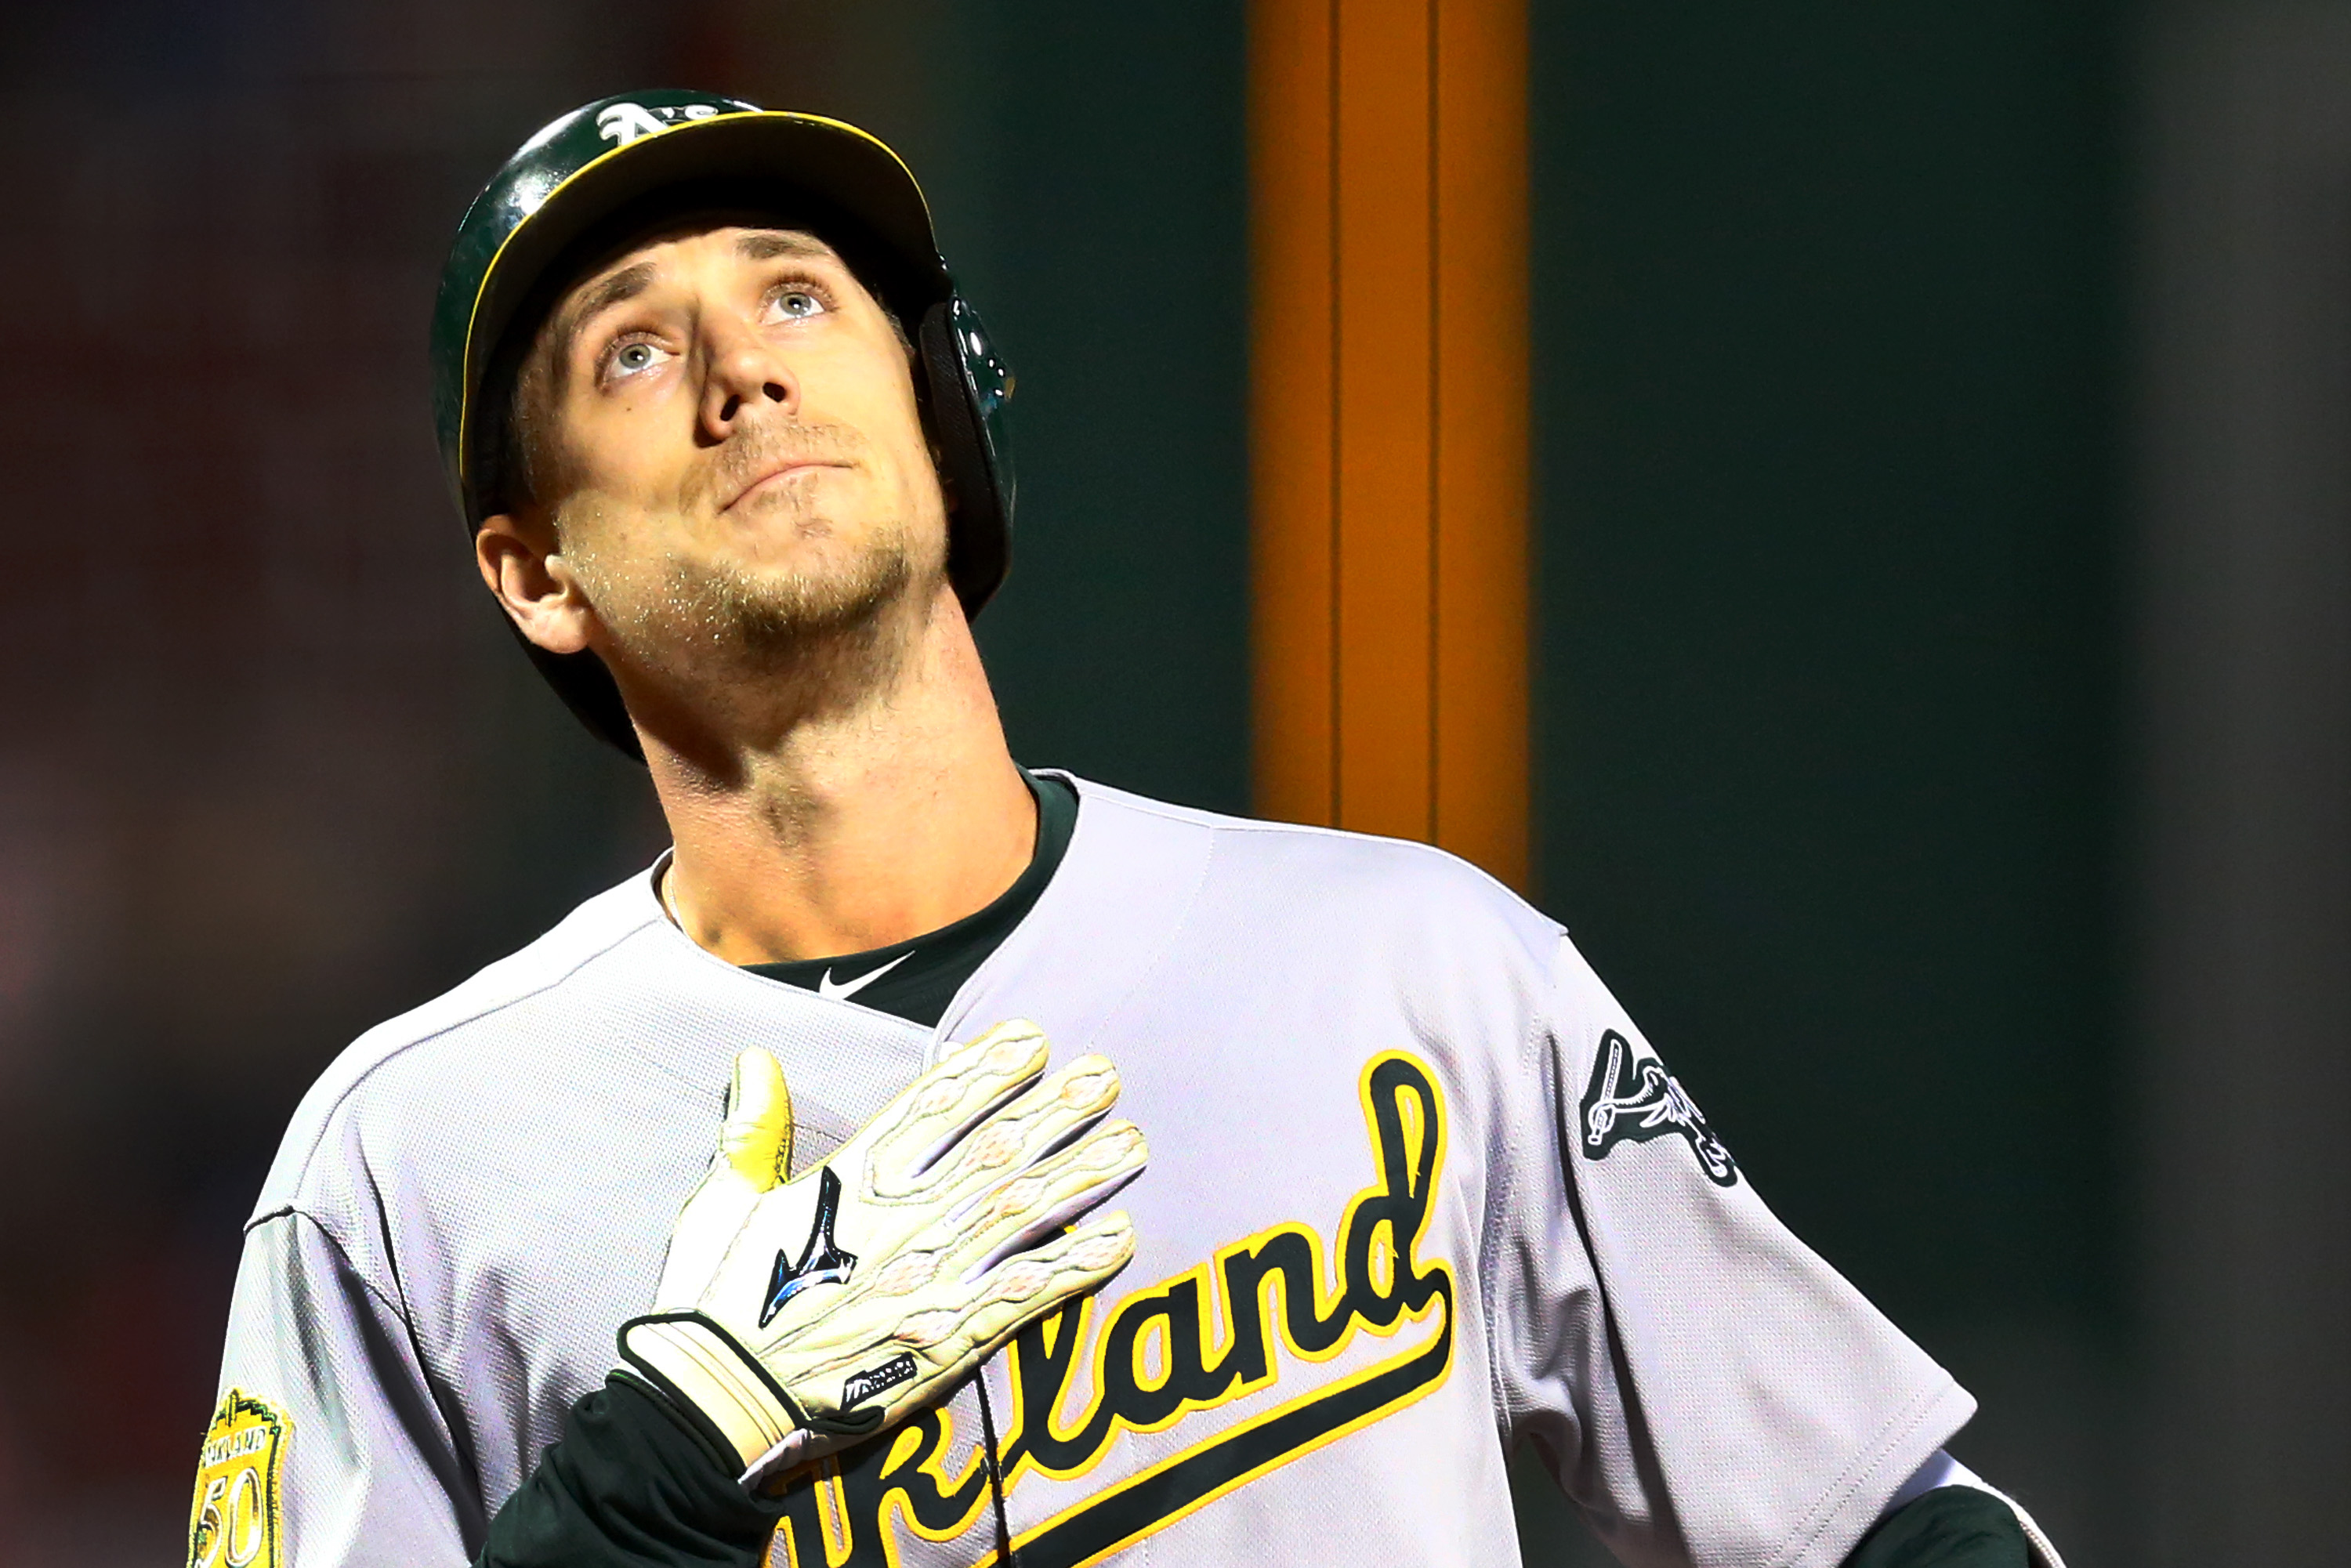 Oakland Athletics outfielder Stephen Piscotty homered in his first game after his mother died in May 2018.